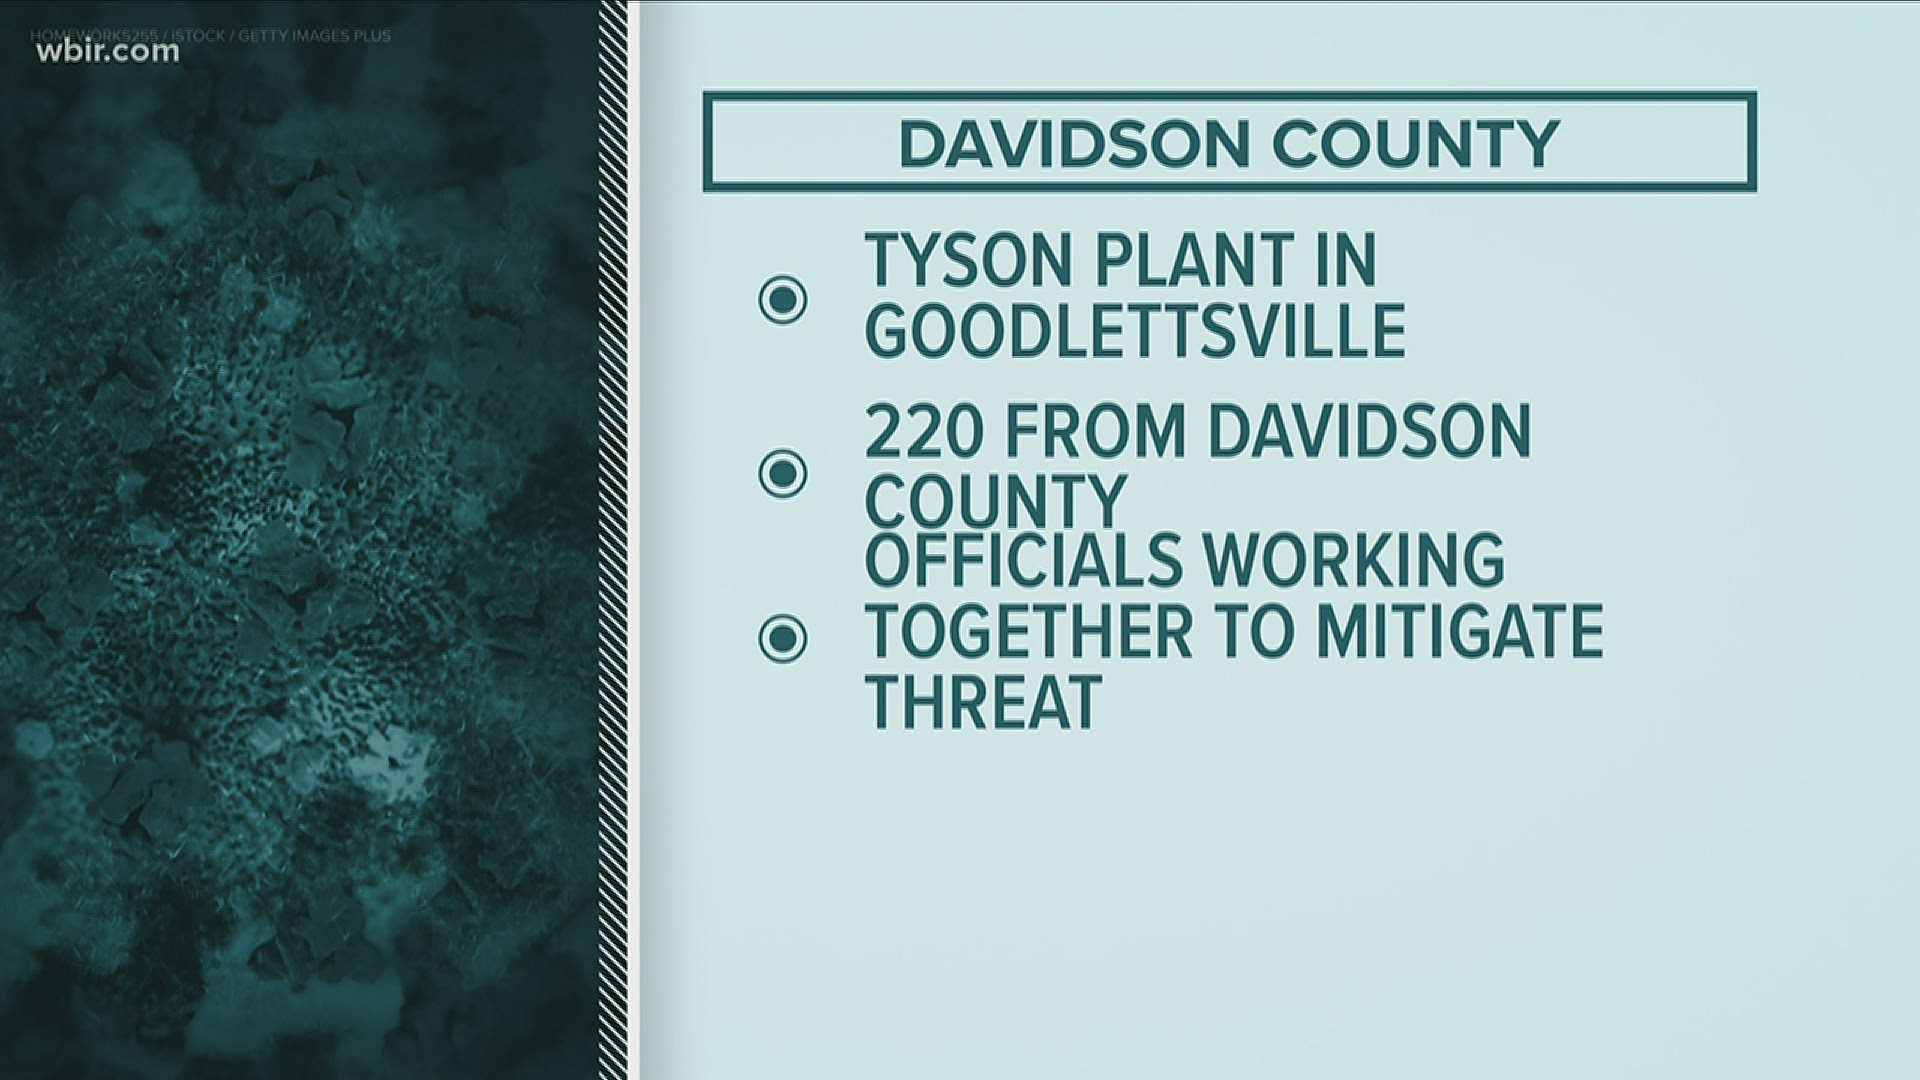 Health officials confirmed almost 300 cases of COVID-19 at the Tyson Plant in Goodlettsville.